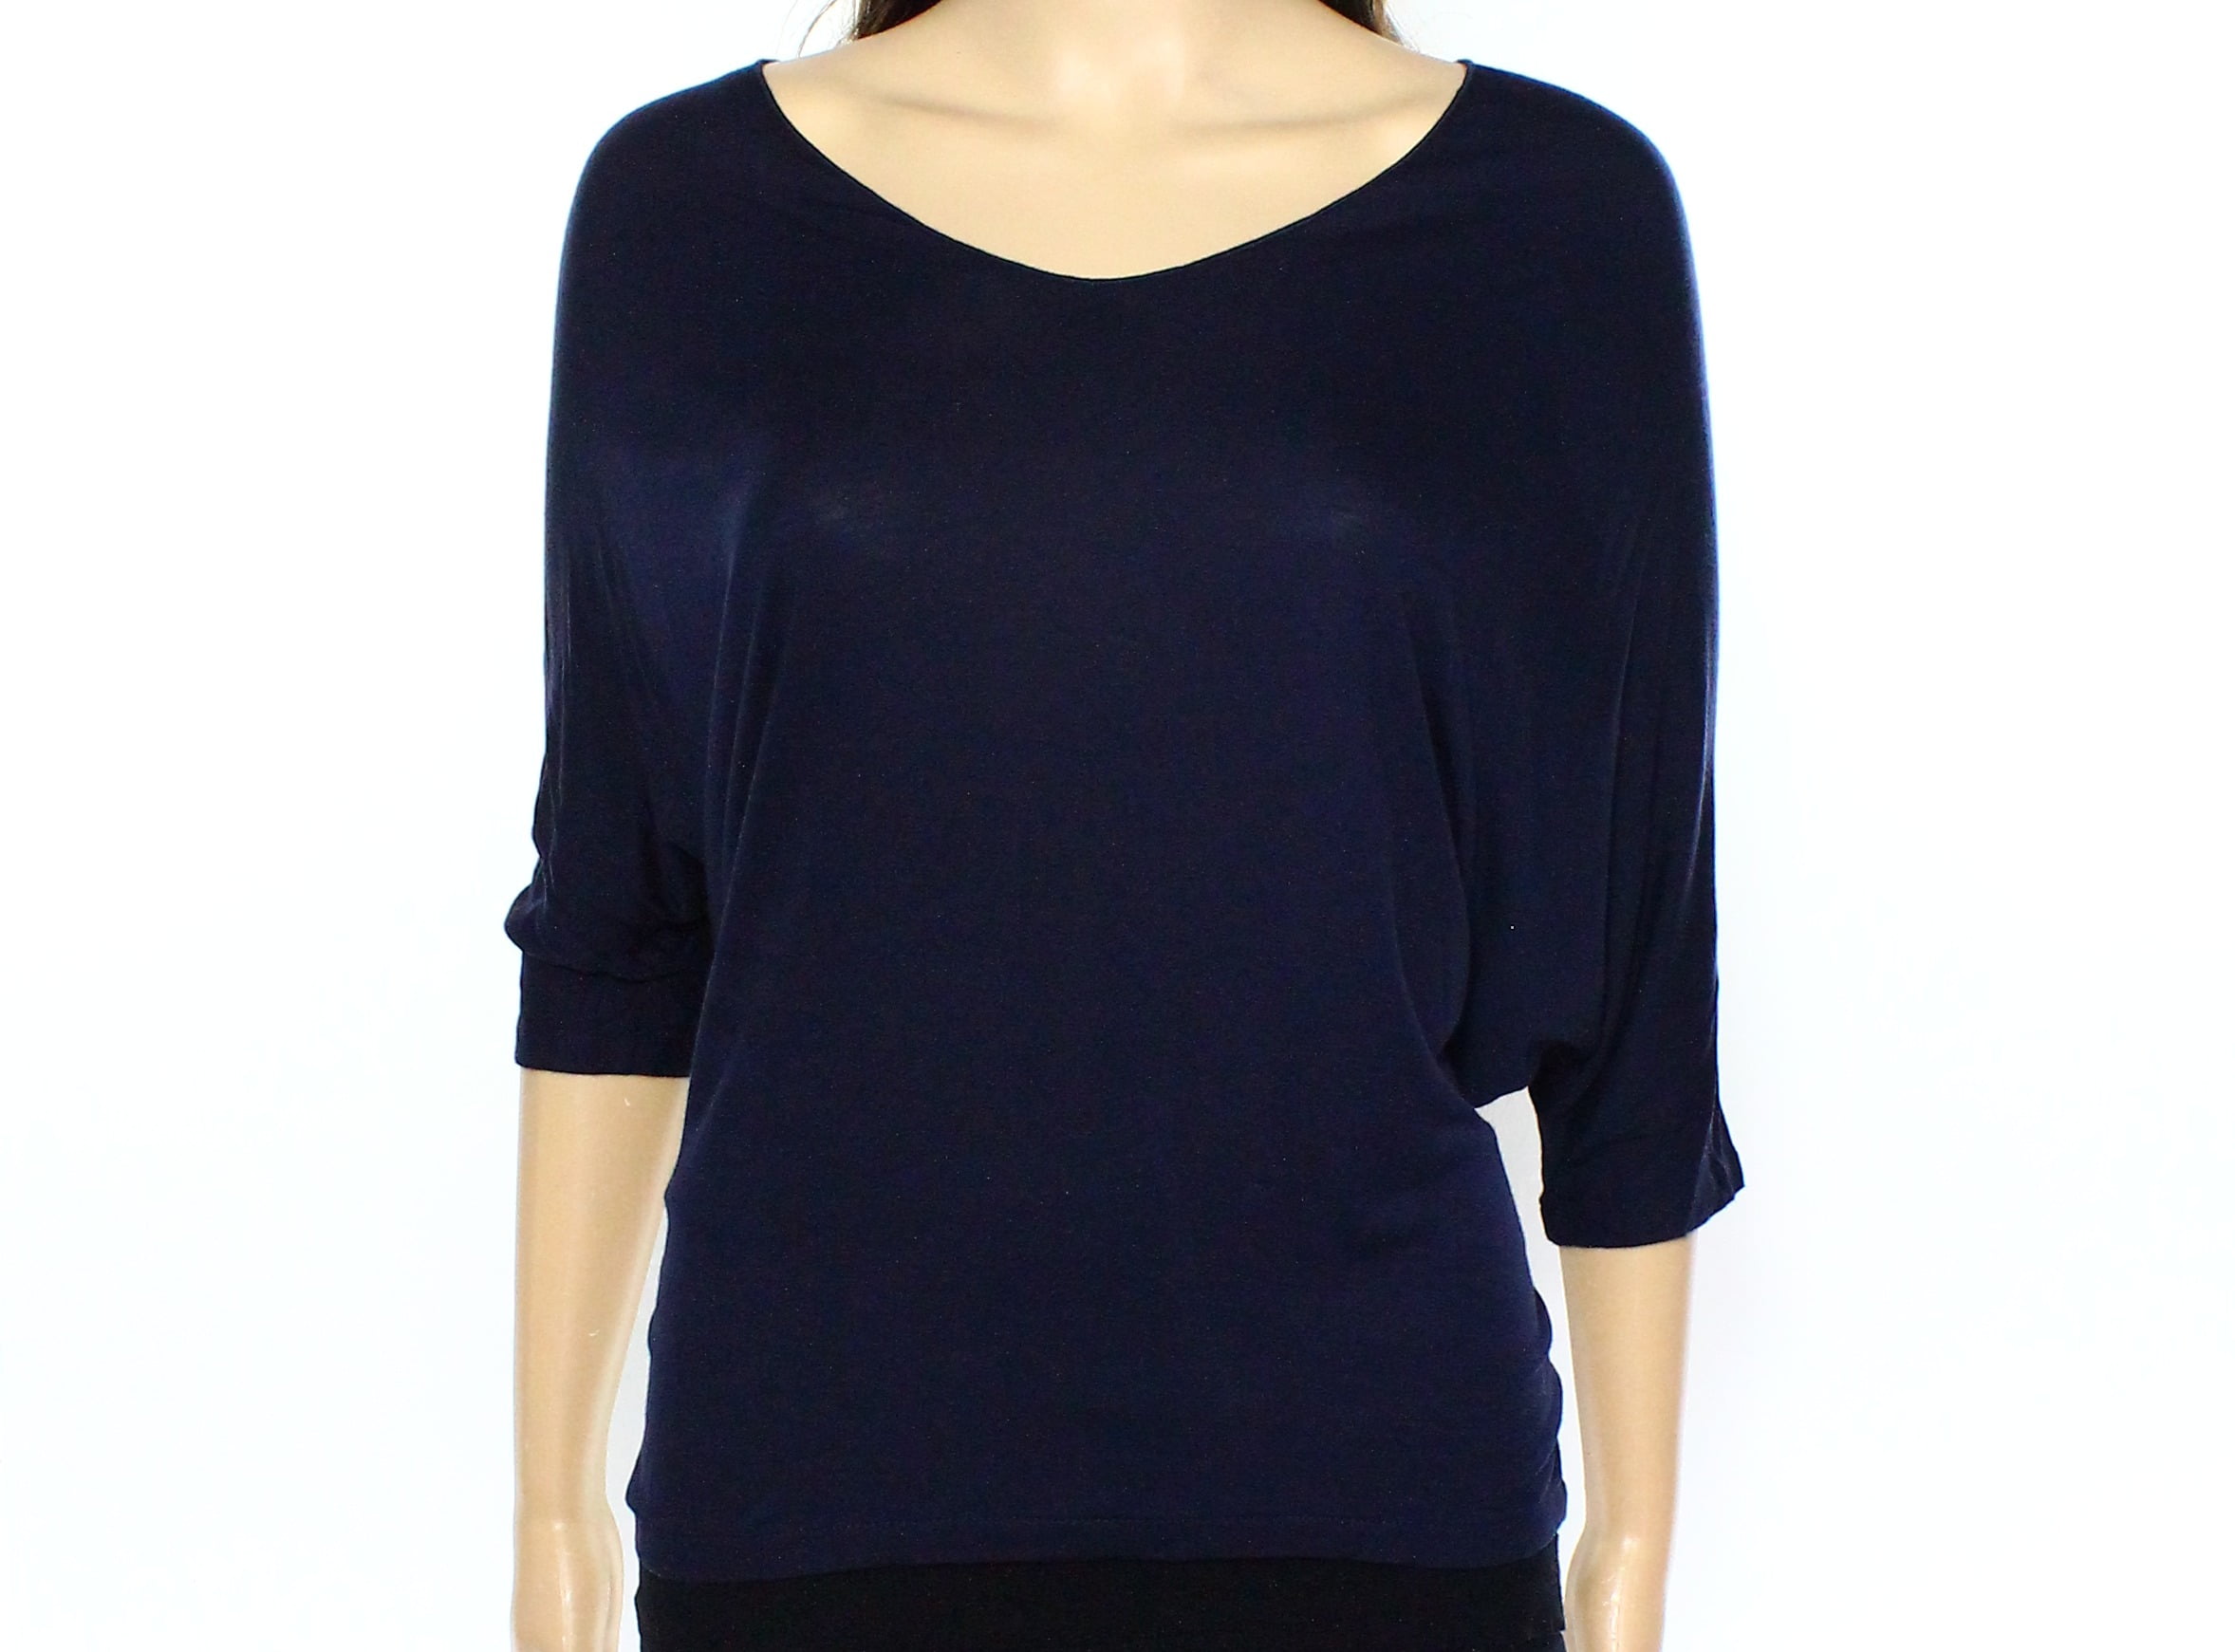 Vince - Vince. NEW Navy Blue Womens Size Small S Scoop Neck Hi-Low ...